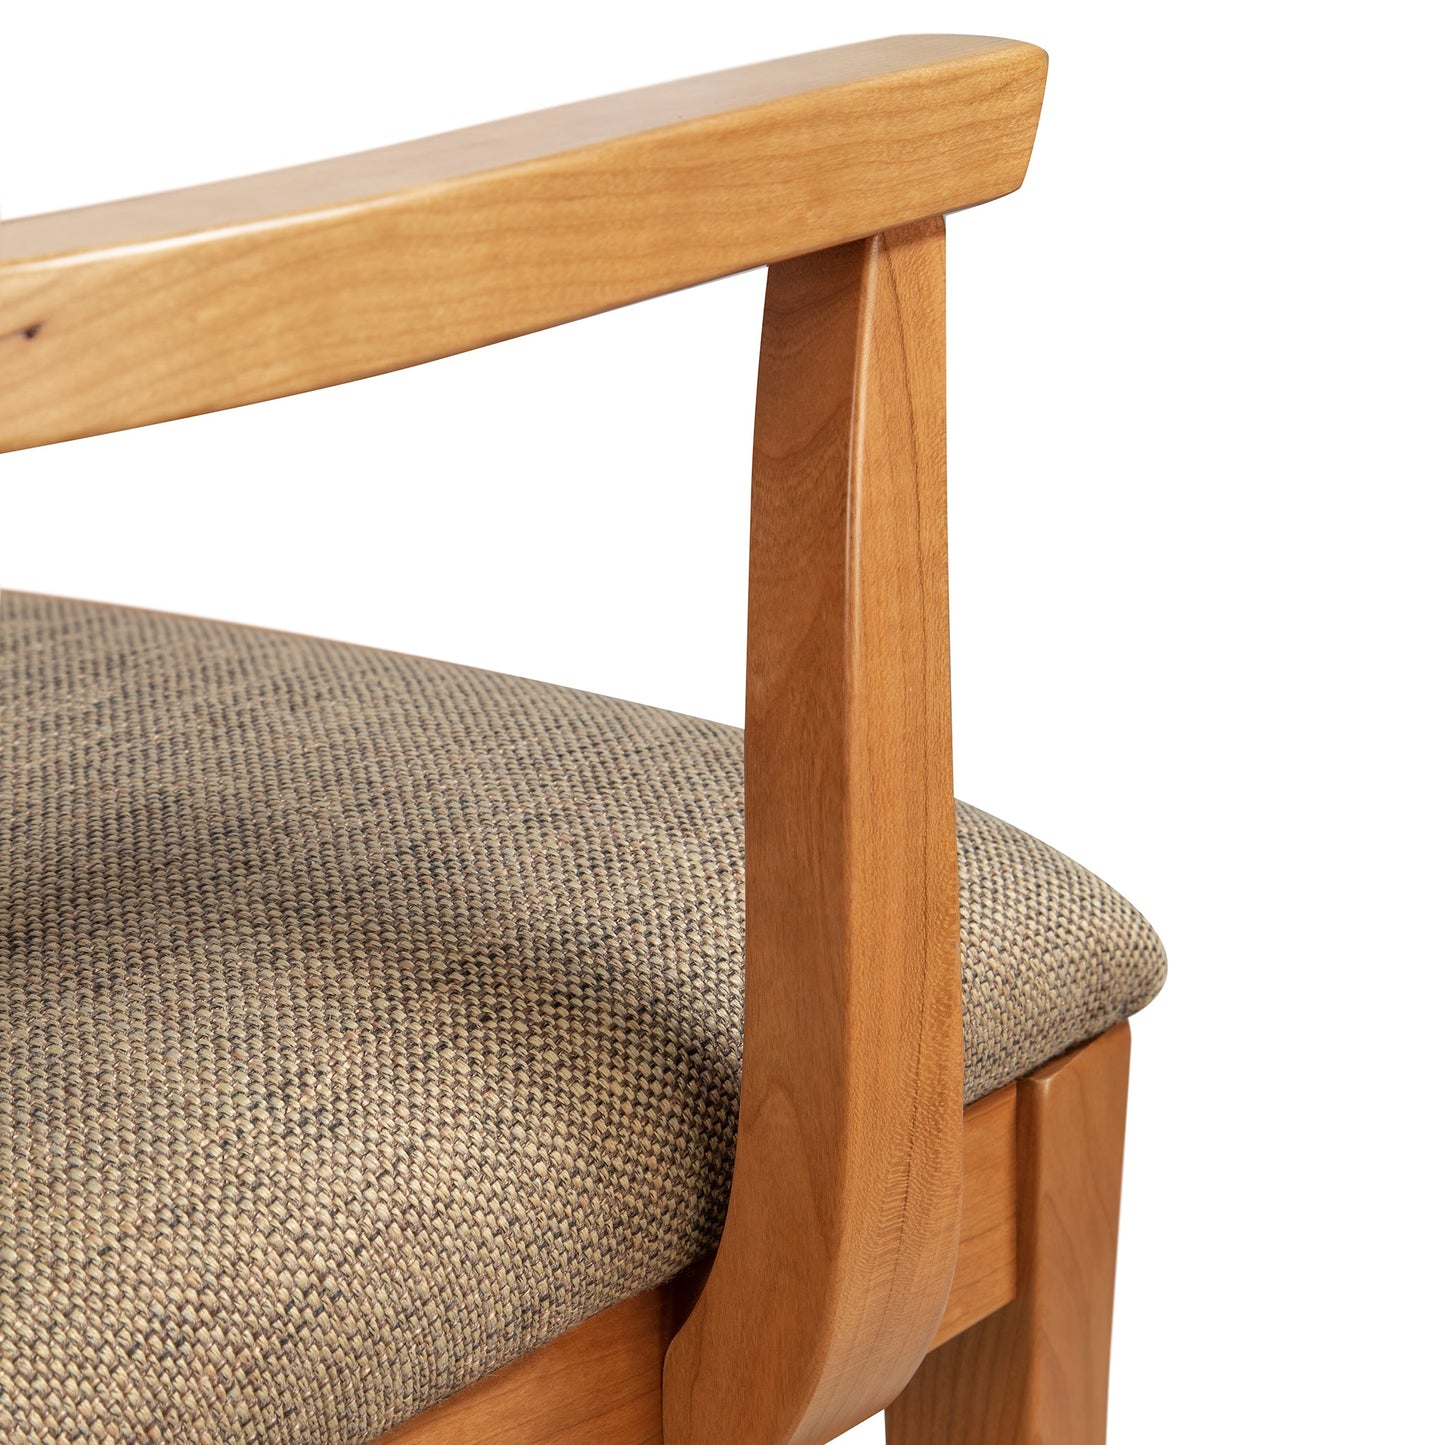 A close up of a Vermont Woods Studios Contemporary Shaker Arm Chair with Barley Upholstery - Ready to Ship wooden chair with a fabric upholstered seat and contemporary design.